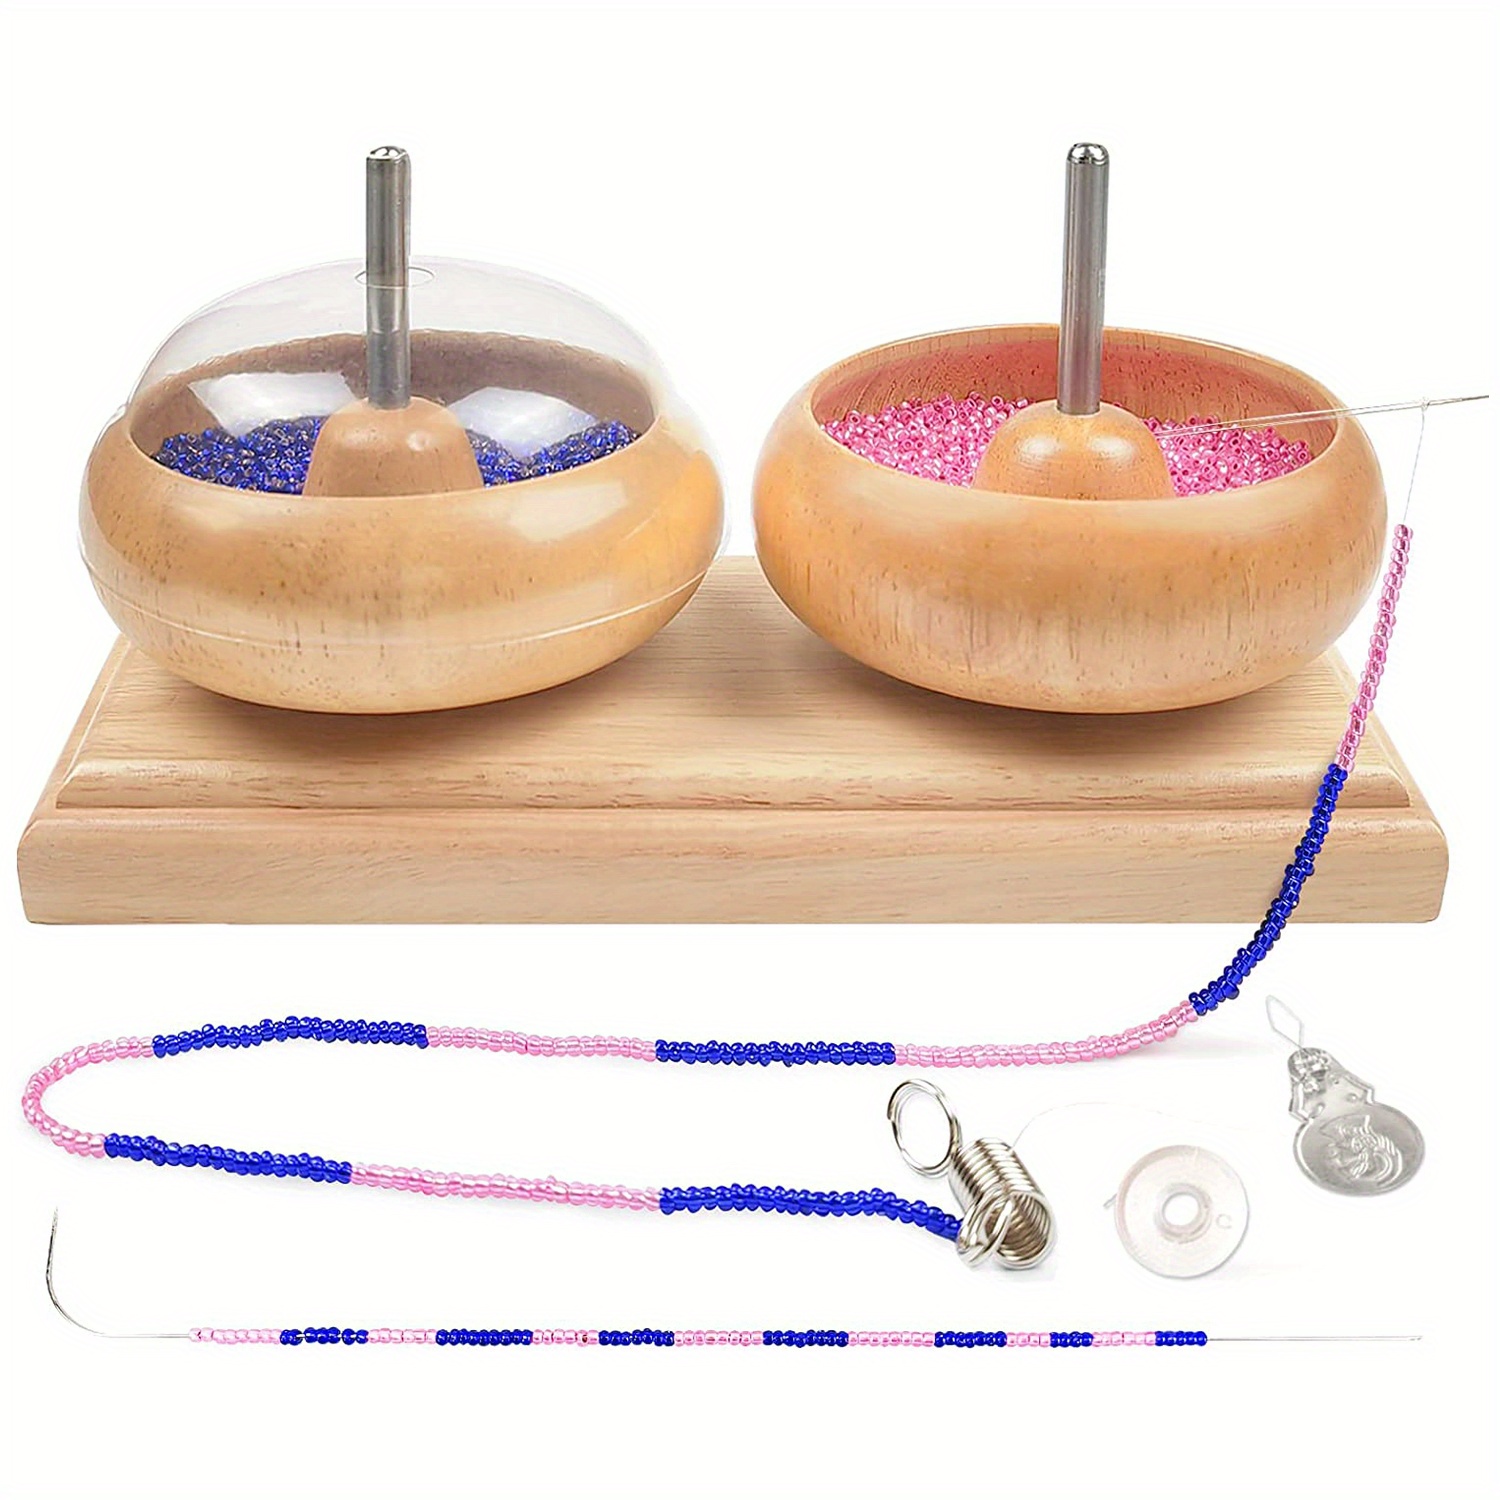 Clay Bead Spinner, Electric Bead Spinner for Jewelry Making